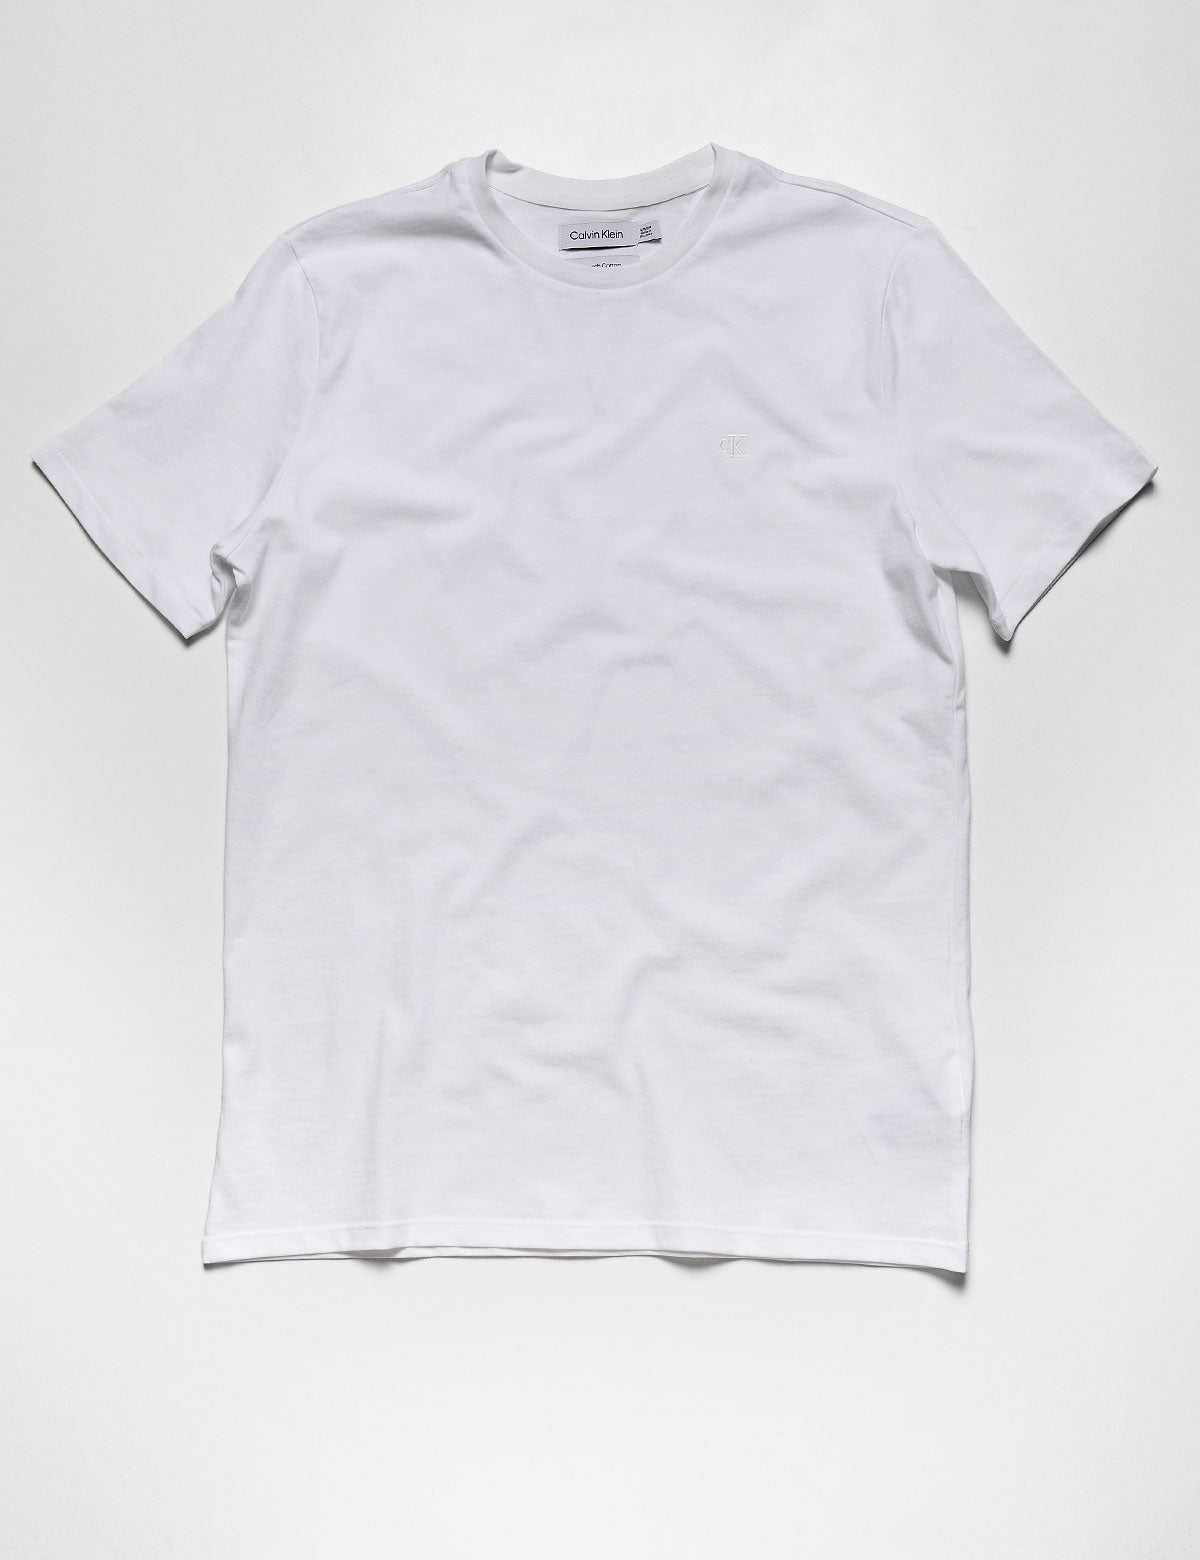 - Smooth Brilliant Tee Brooklyn Tailors – Crewneck White Short Solid Sleeve Cotton